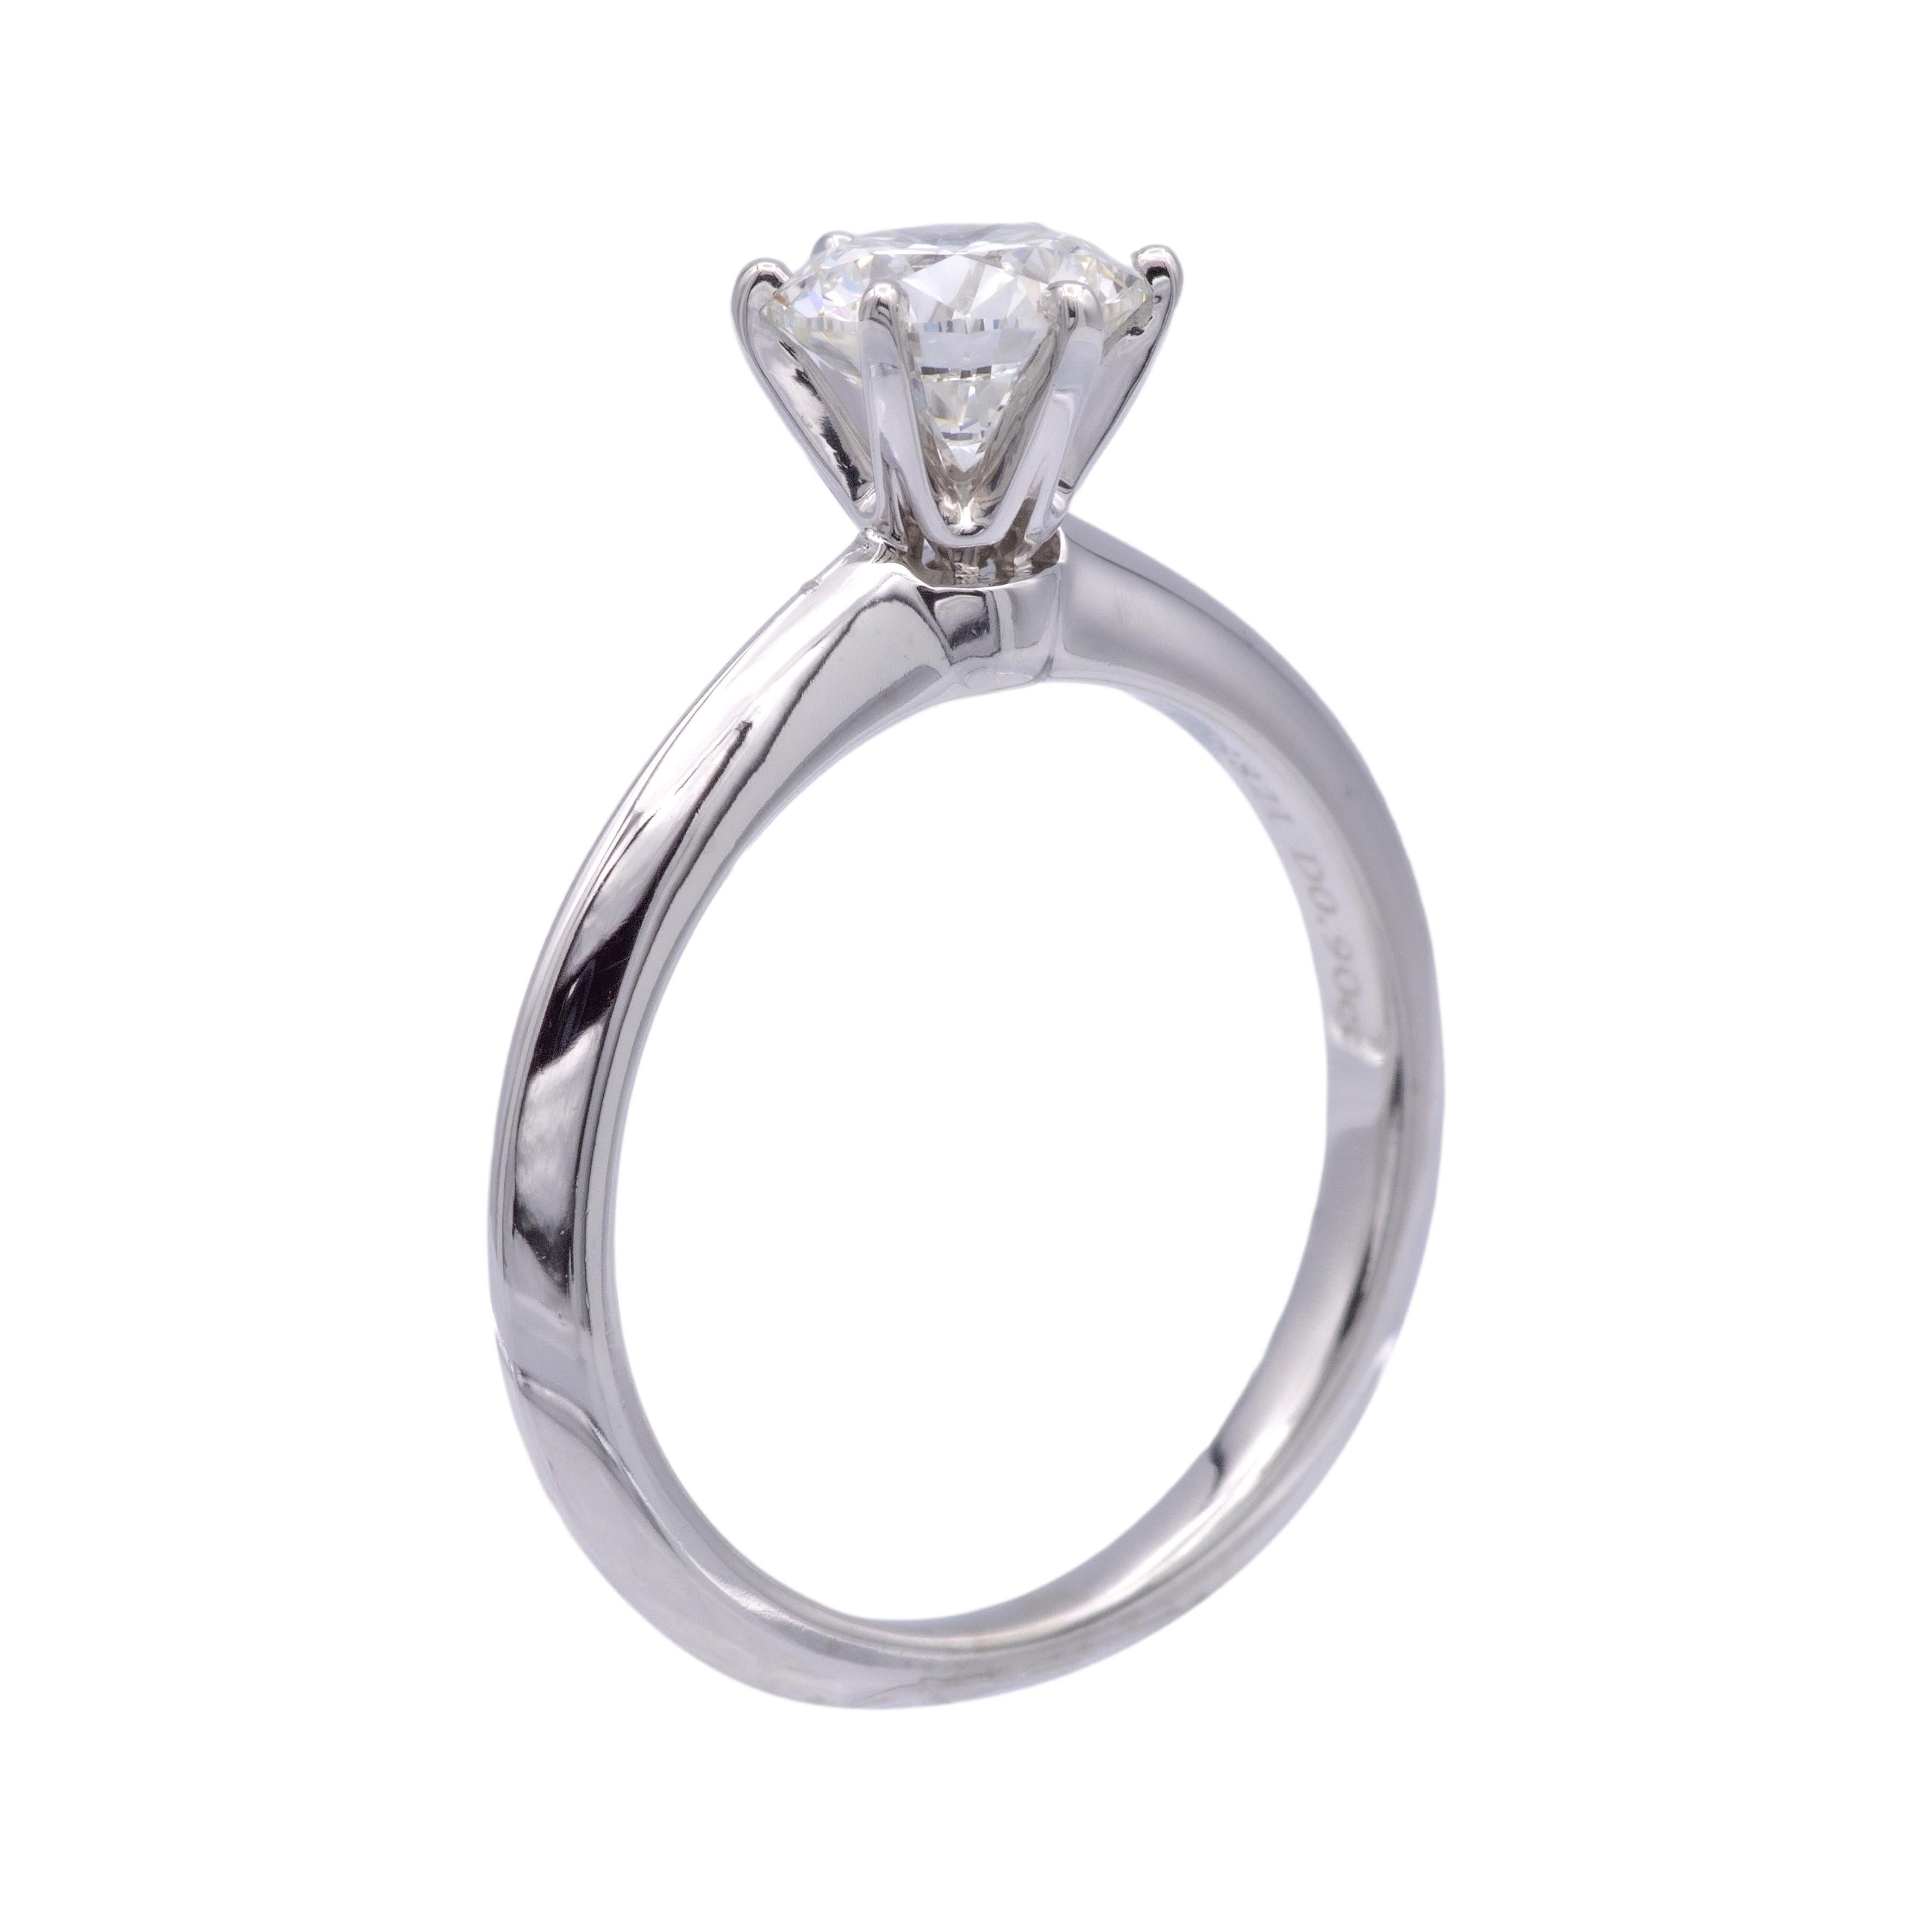 Tiffany & Co. solitaire engagement ring finely crafted in a 6 prong platinum mounting featuring a triple X round brilliant cut center weighing 0.90 carats, G color VVS2 clarity diamond certified by the Gemological Institute of America with excellent